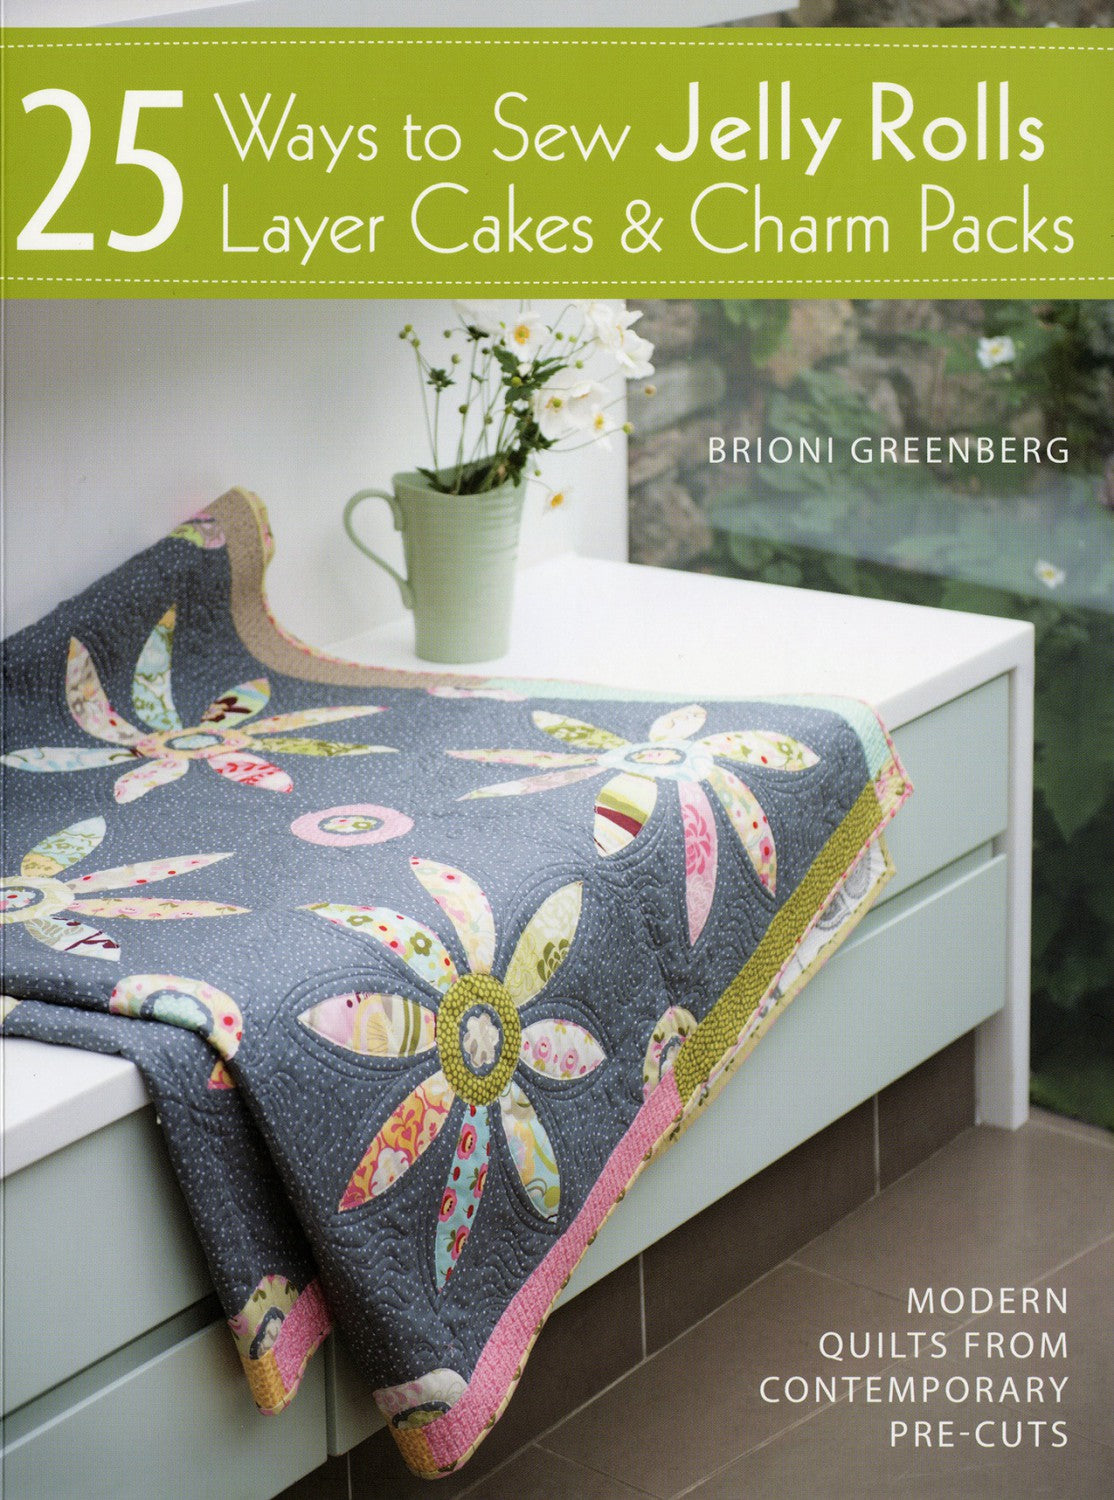 25 Ways To Sew Jelly Rolls, Layer Cakes, and Charm Packs - U7121 - David & Charles